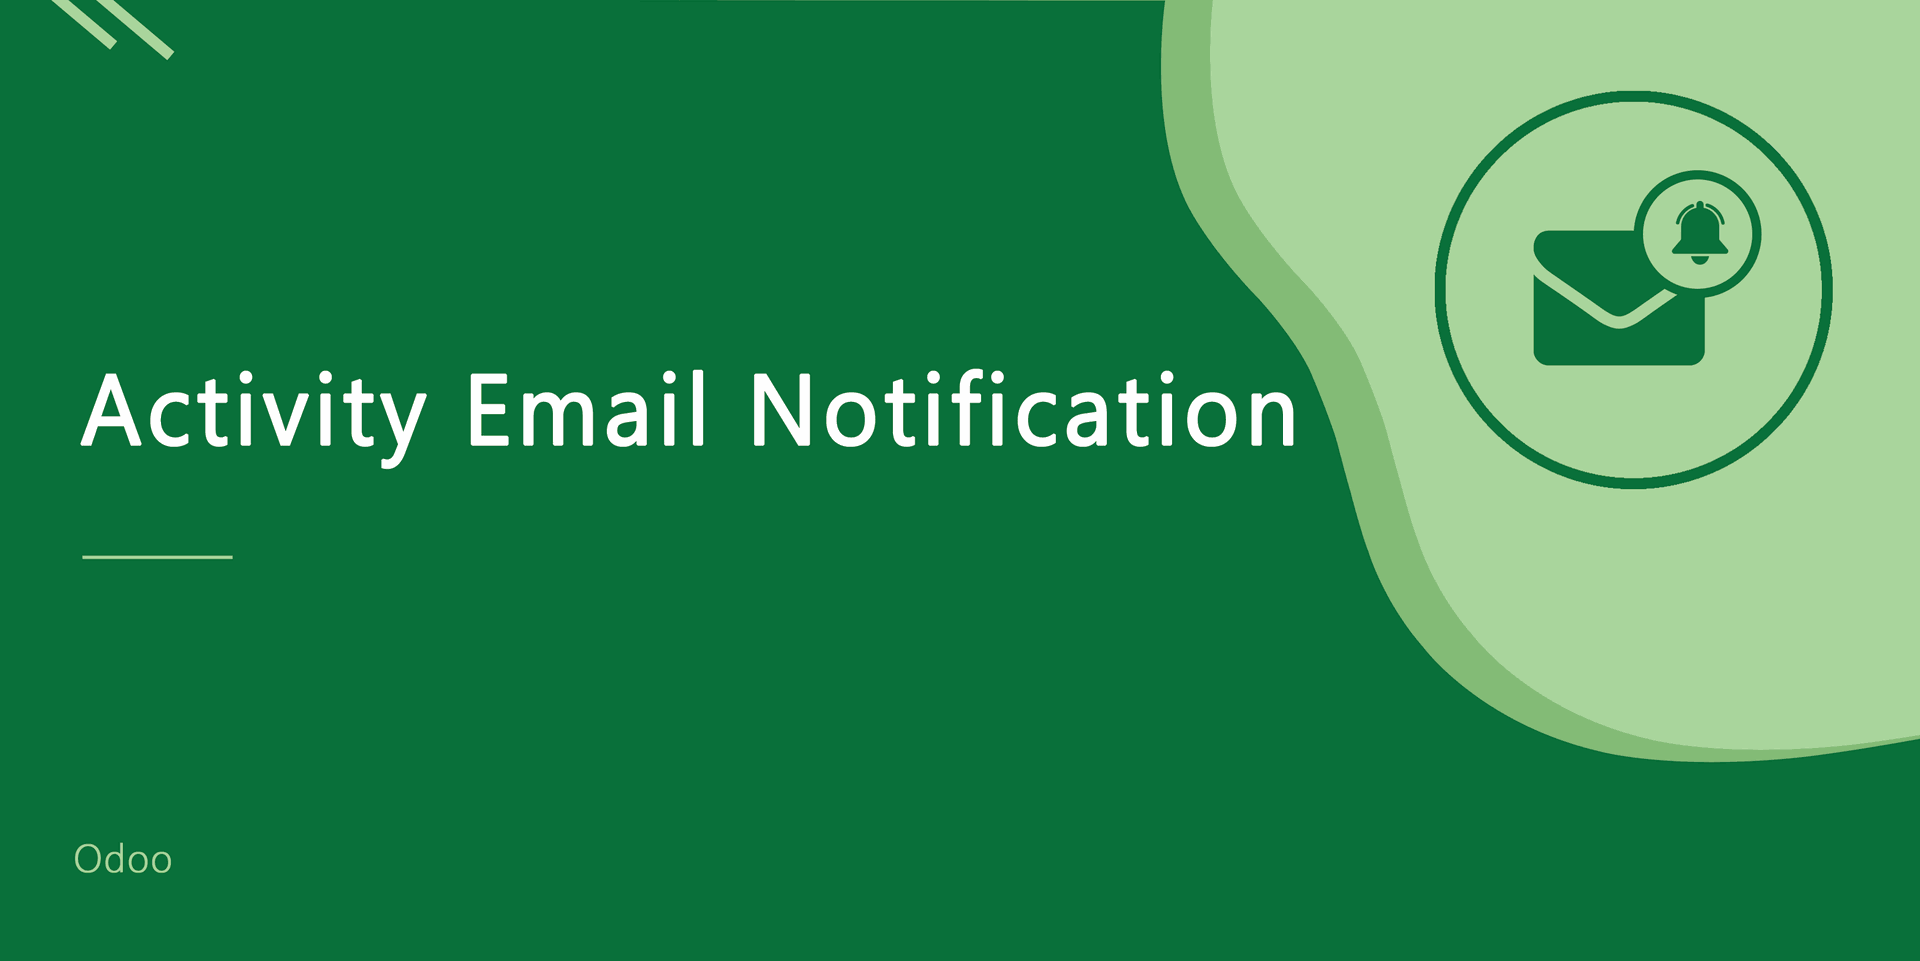 Activity Email Notification